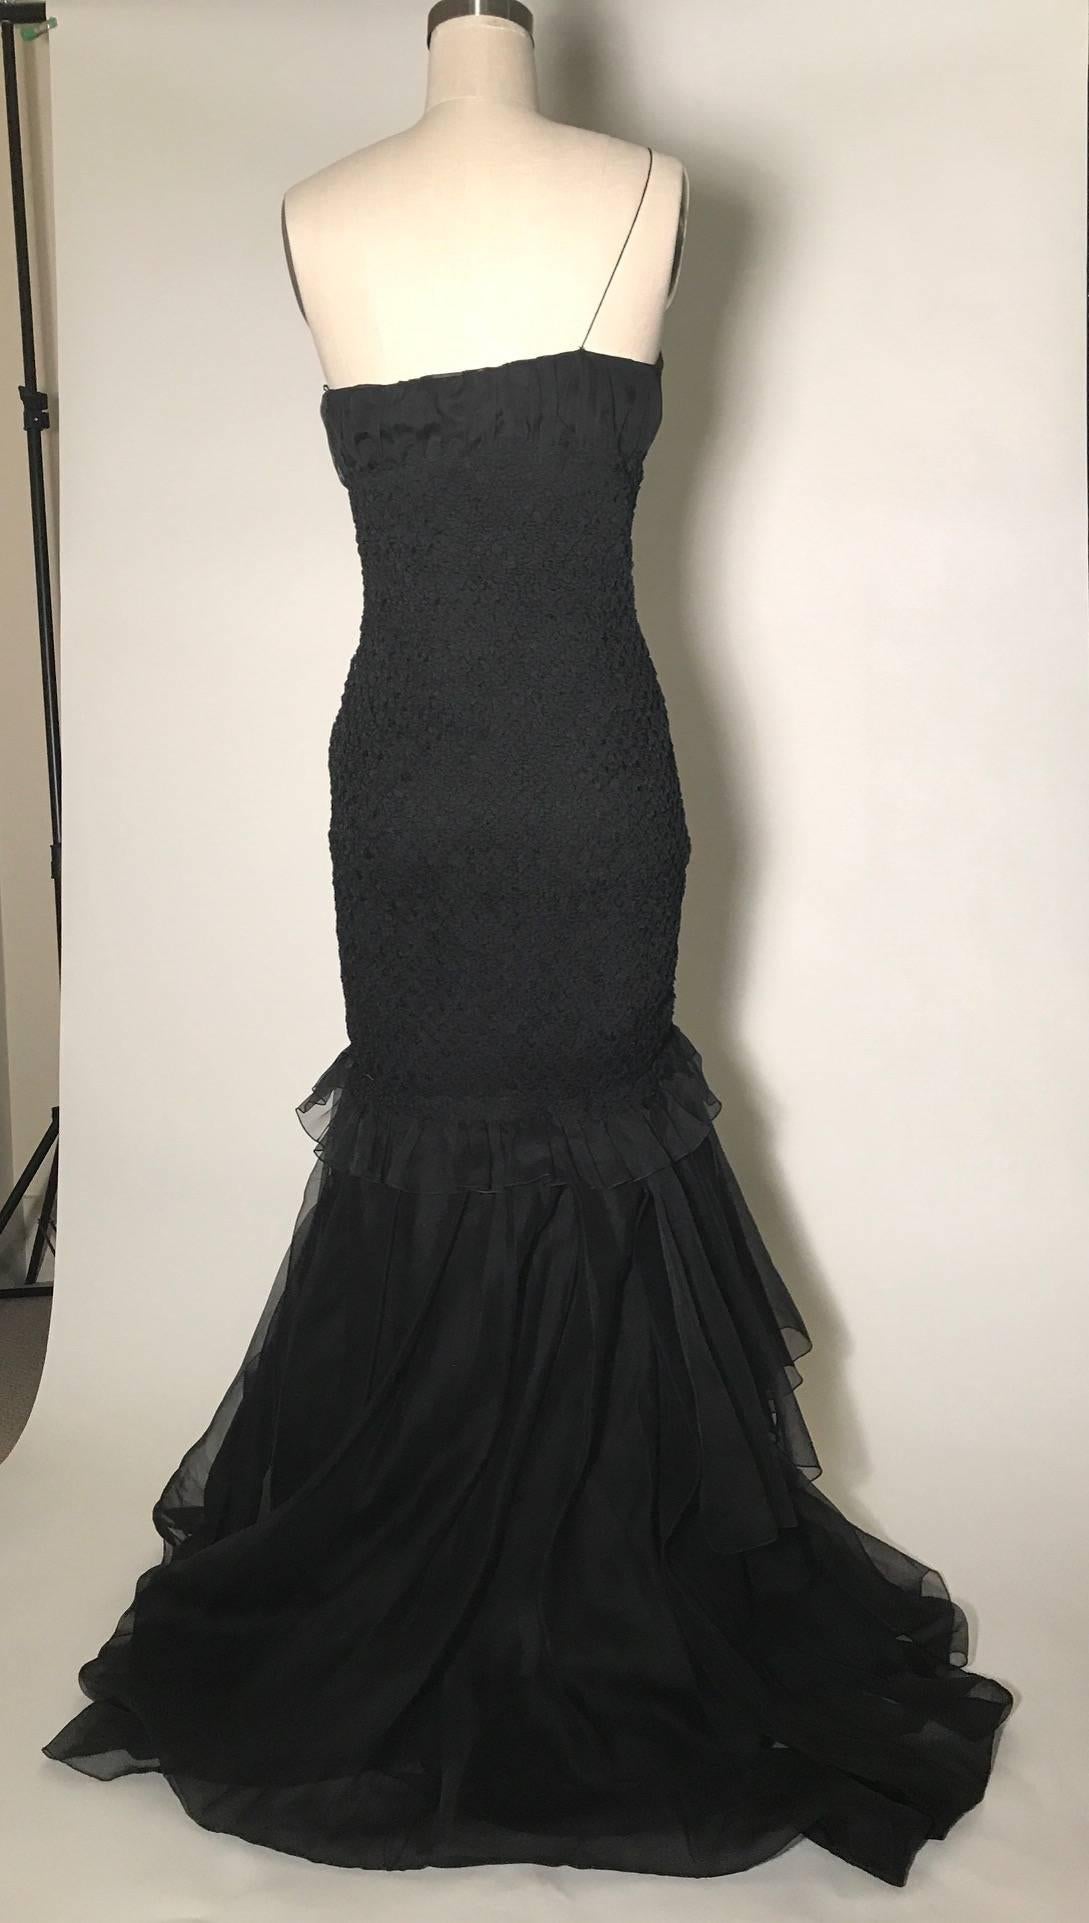 Prada one shouldered gown with stretchy textured detail and bodice. Rosette detail at shoulder with a spaghetti strap. Rosette detail at tiered draped hem. Side zip and hook and eye.

100% silk. 

Made in Italy.

Size IT 40, approximate US 4, see